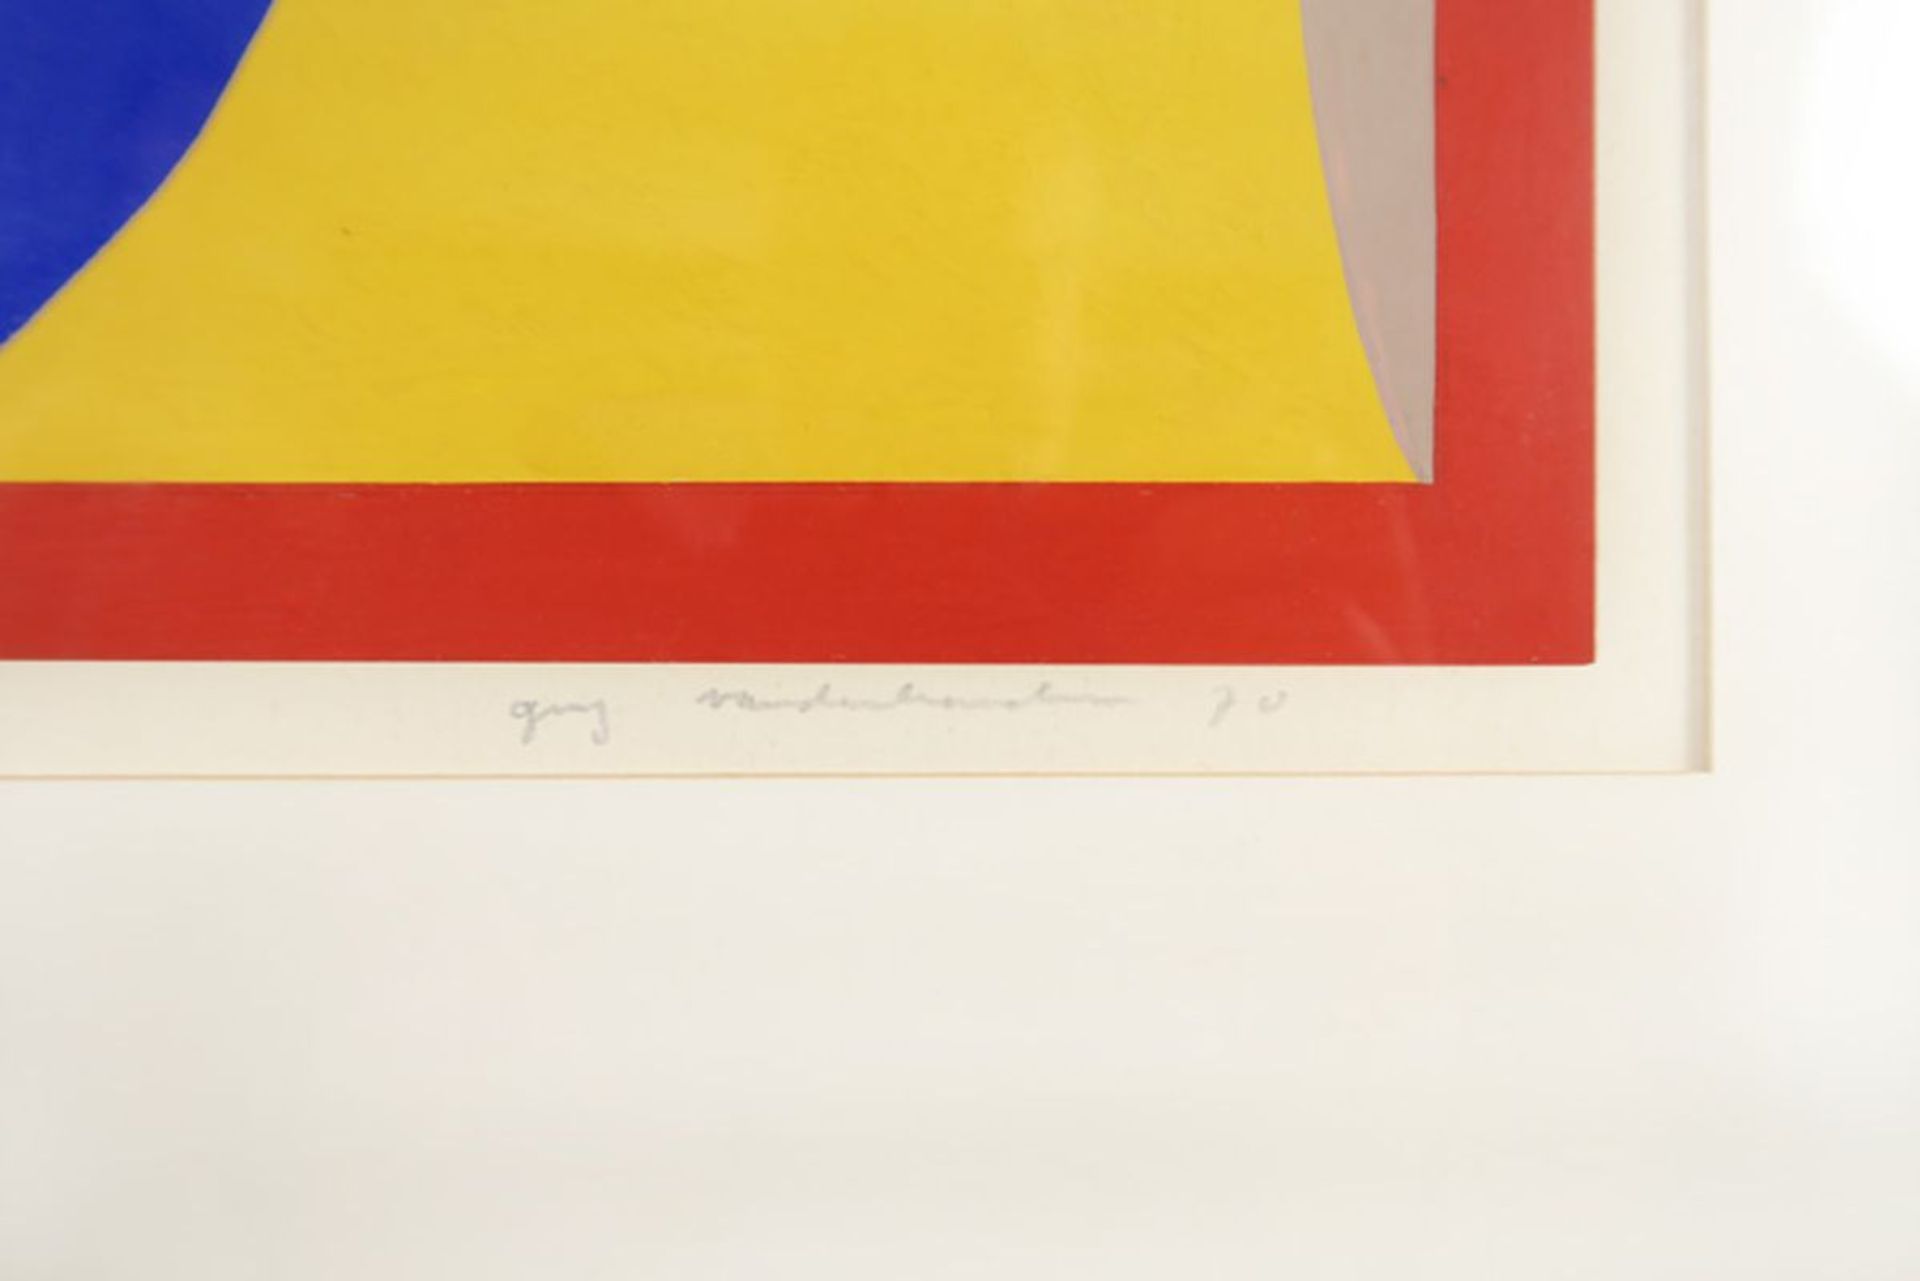 20th Cent. Belgian geomtric abstract " X1 " gouache - signed Guy Vandenbranden and [...] - Image 3 of 3